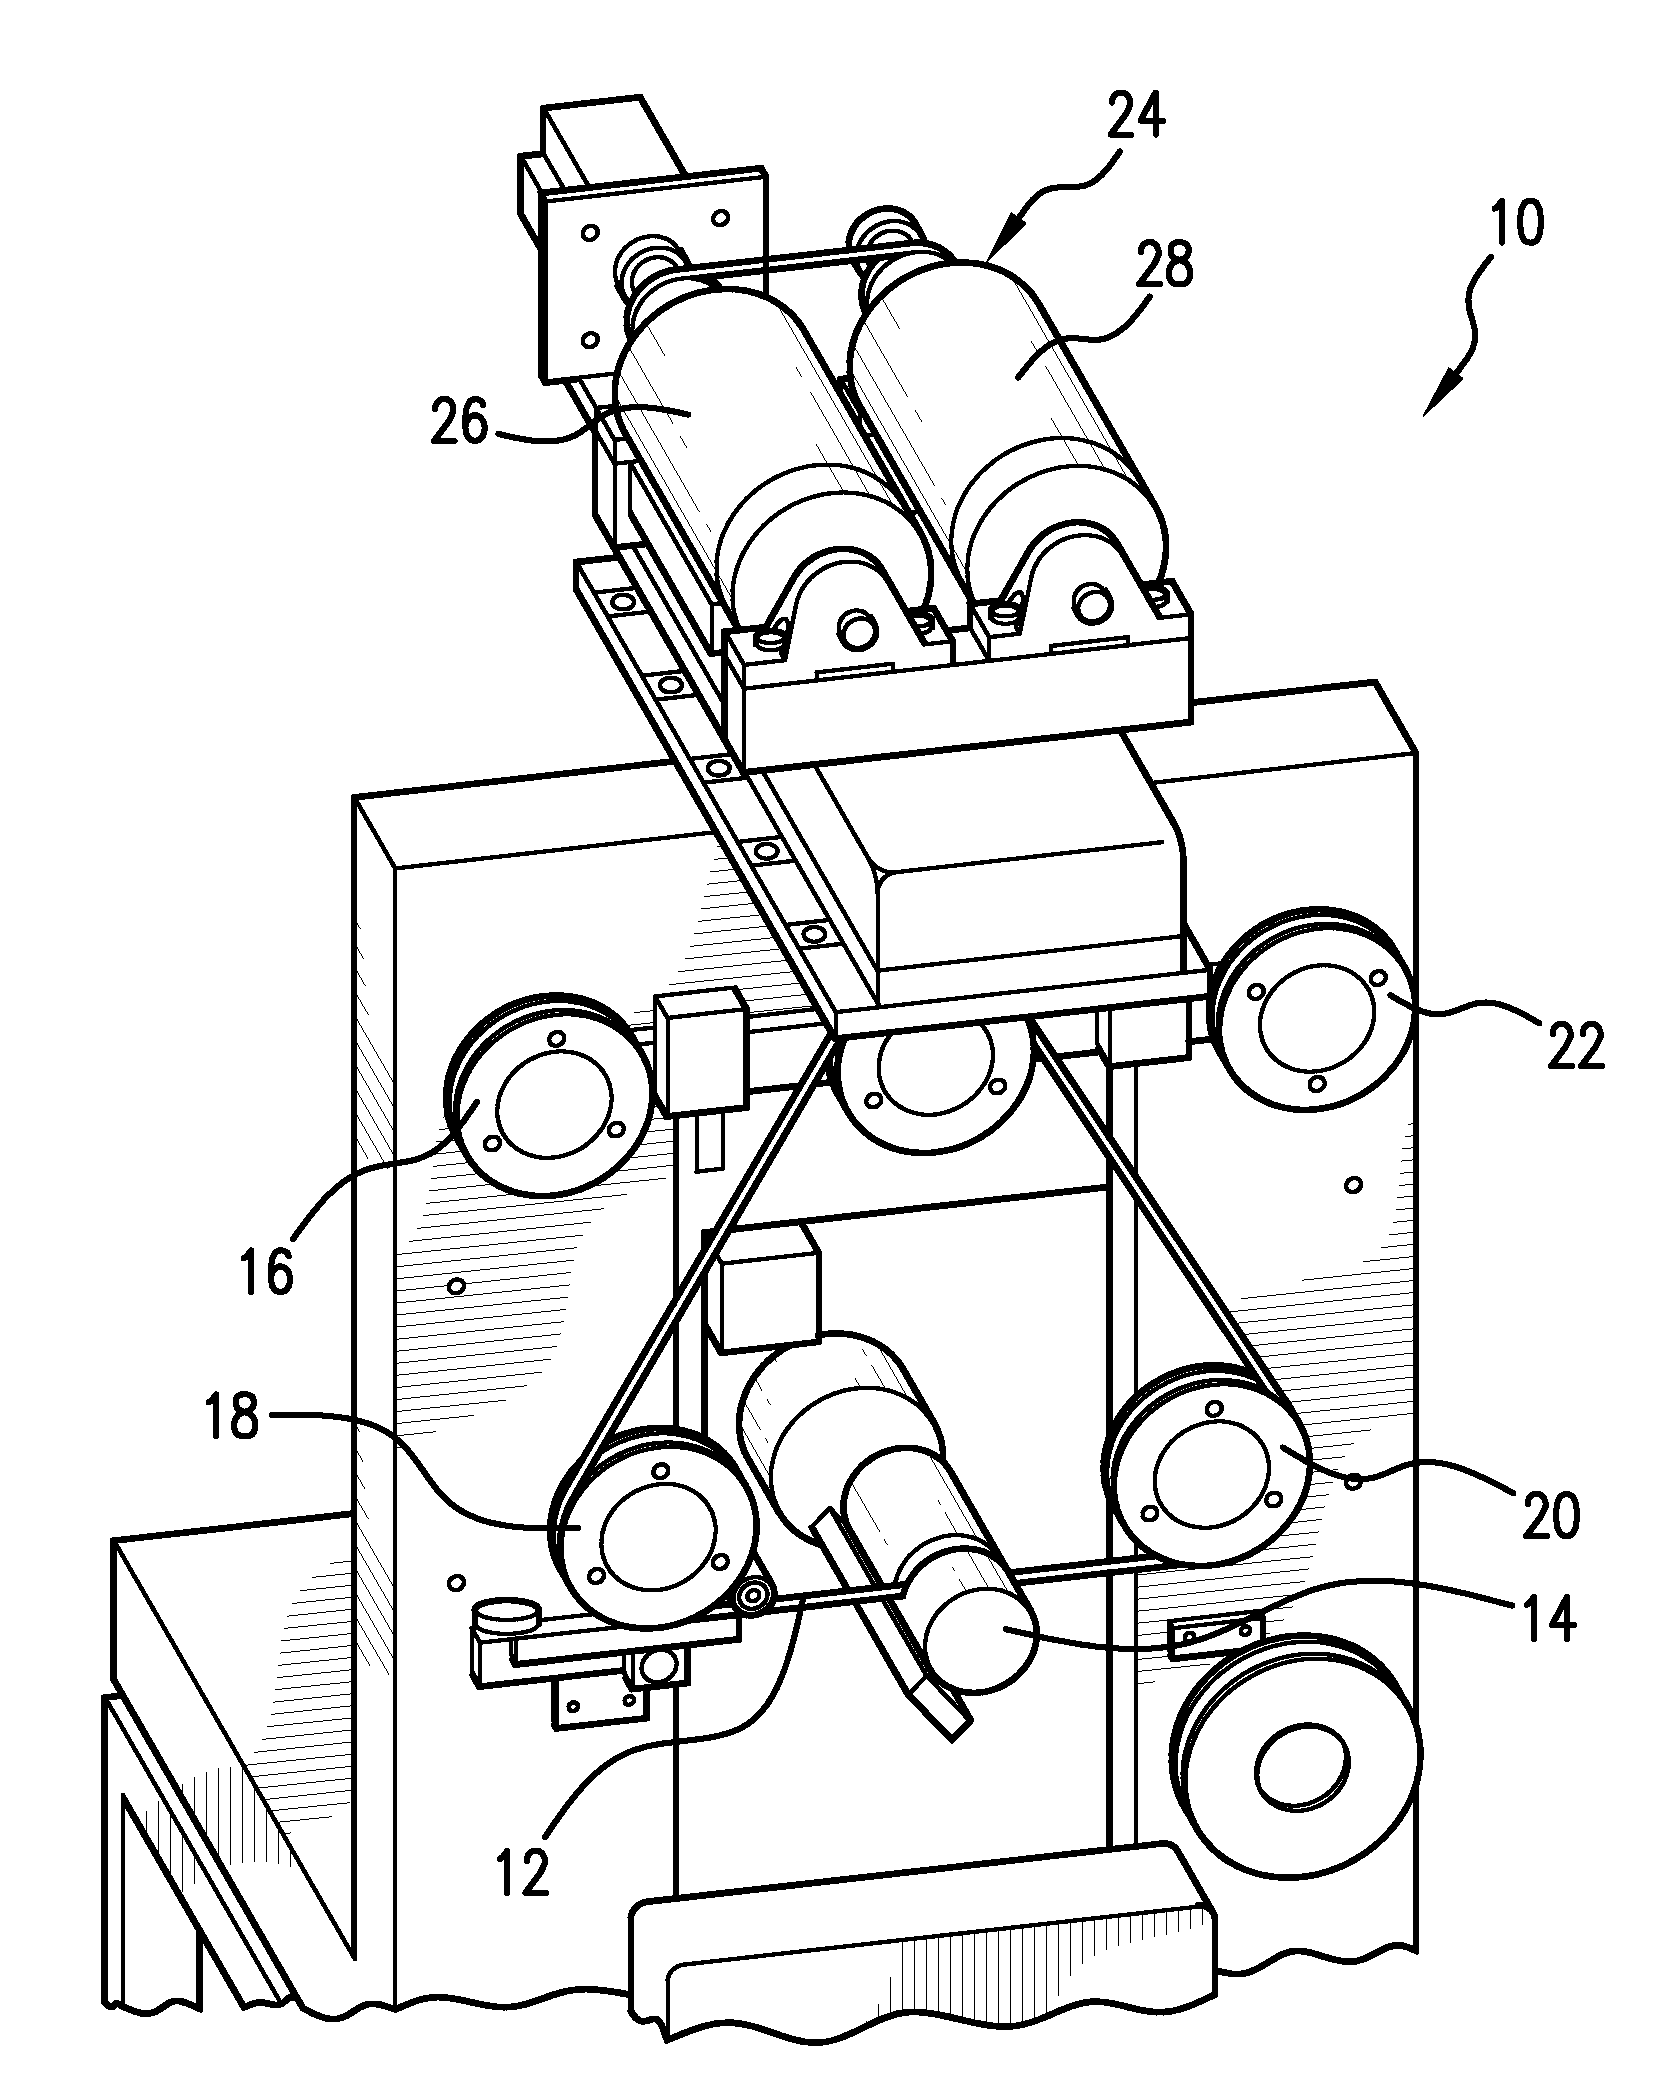 Wire slicing system